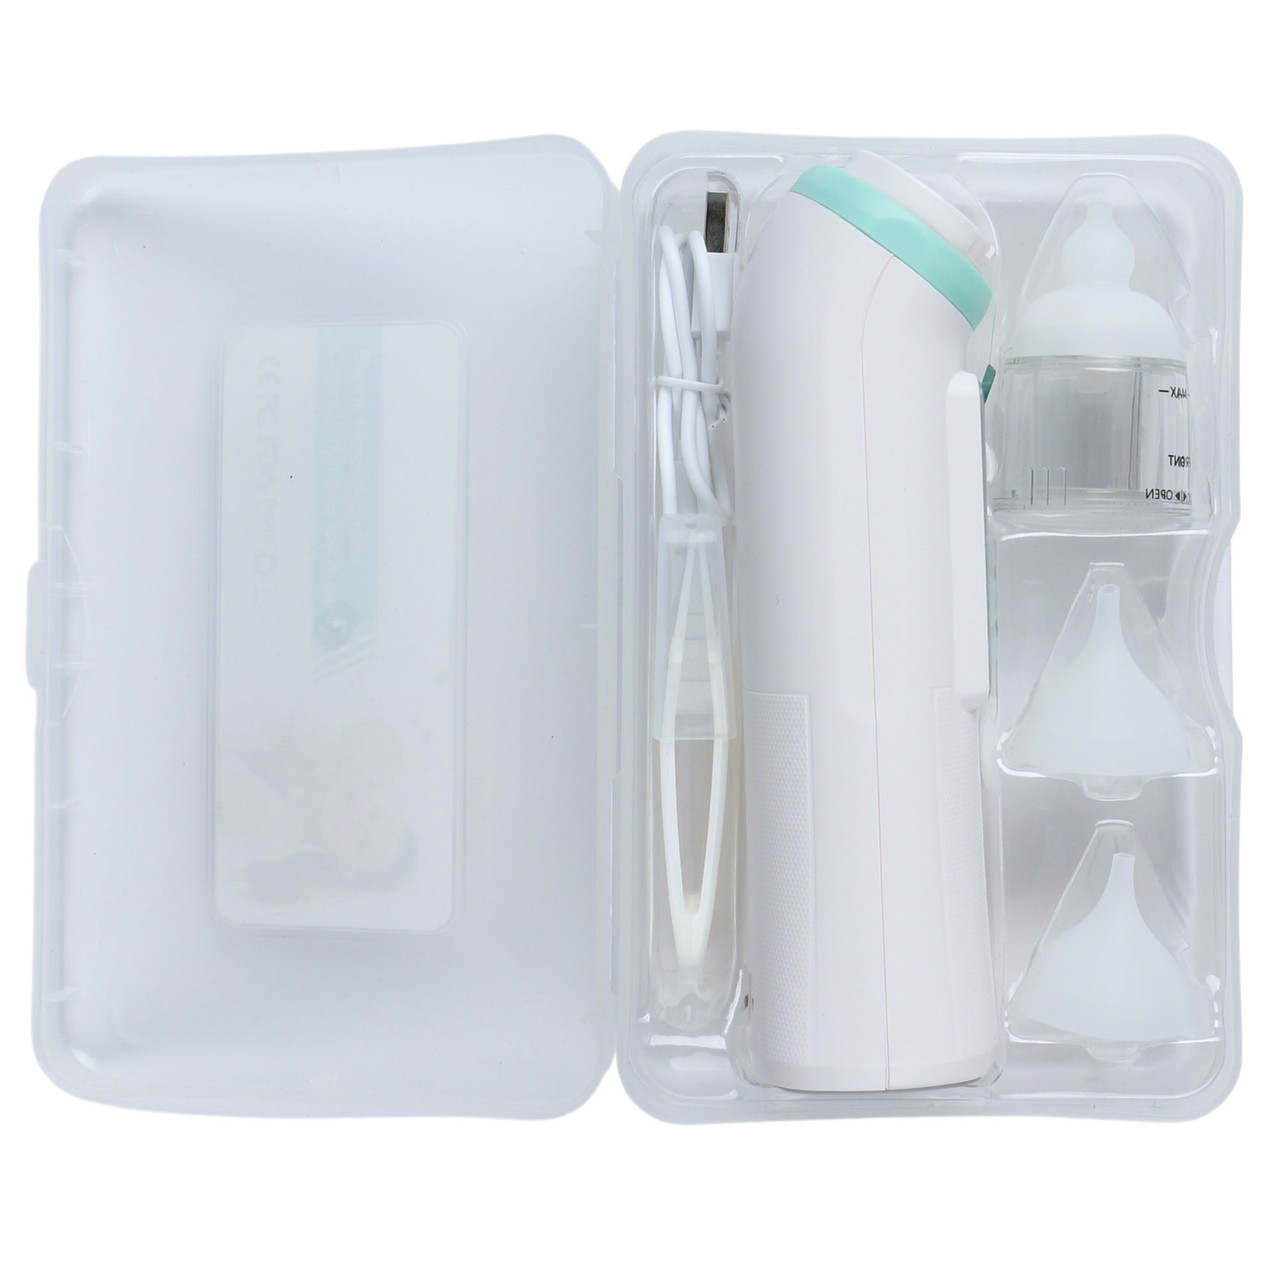 Baby Nasal Aspirator for Congestion Relief